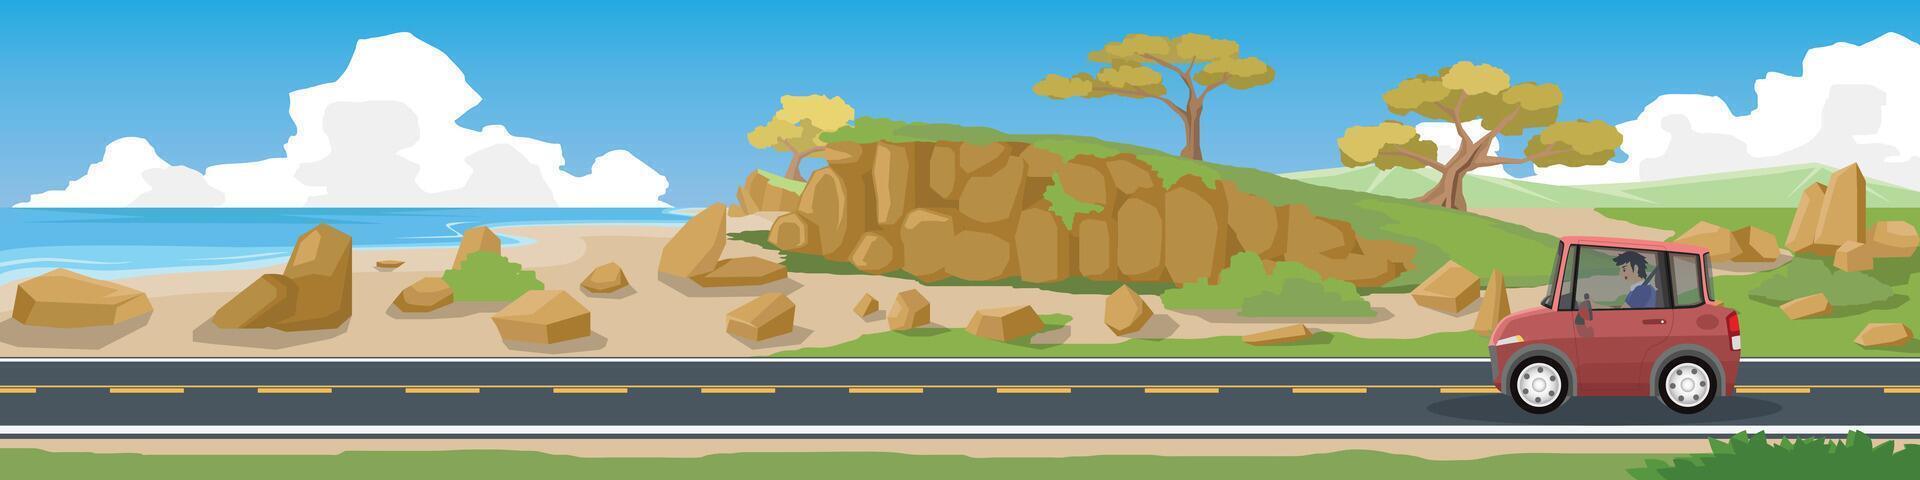 Horizontal view of Asphalt road. Coastal area lined with hills and rocks. with sedar car red color and driving man. background of mountain under blue sky and white clouds. vector